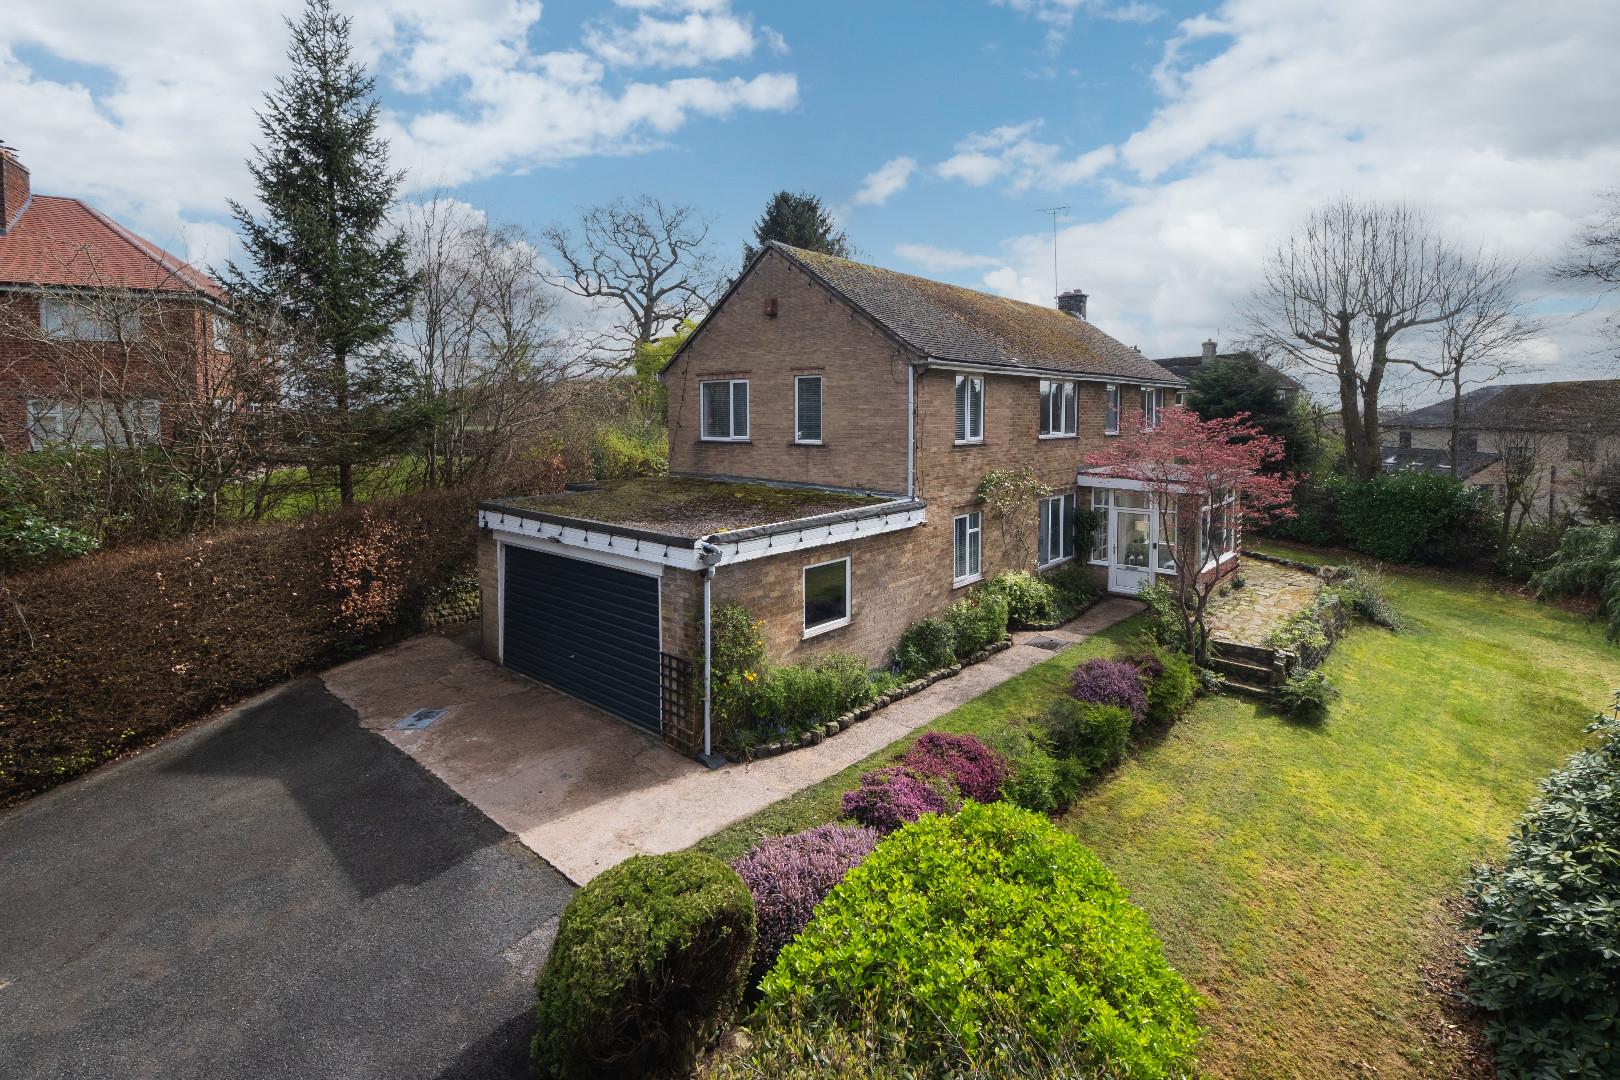 5 bedroom  Detached House for Sale in Northwich